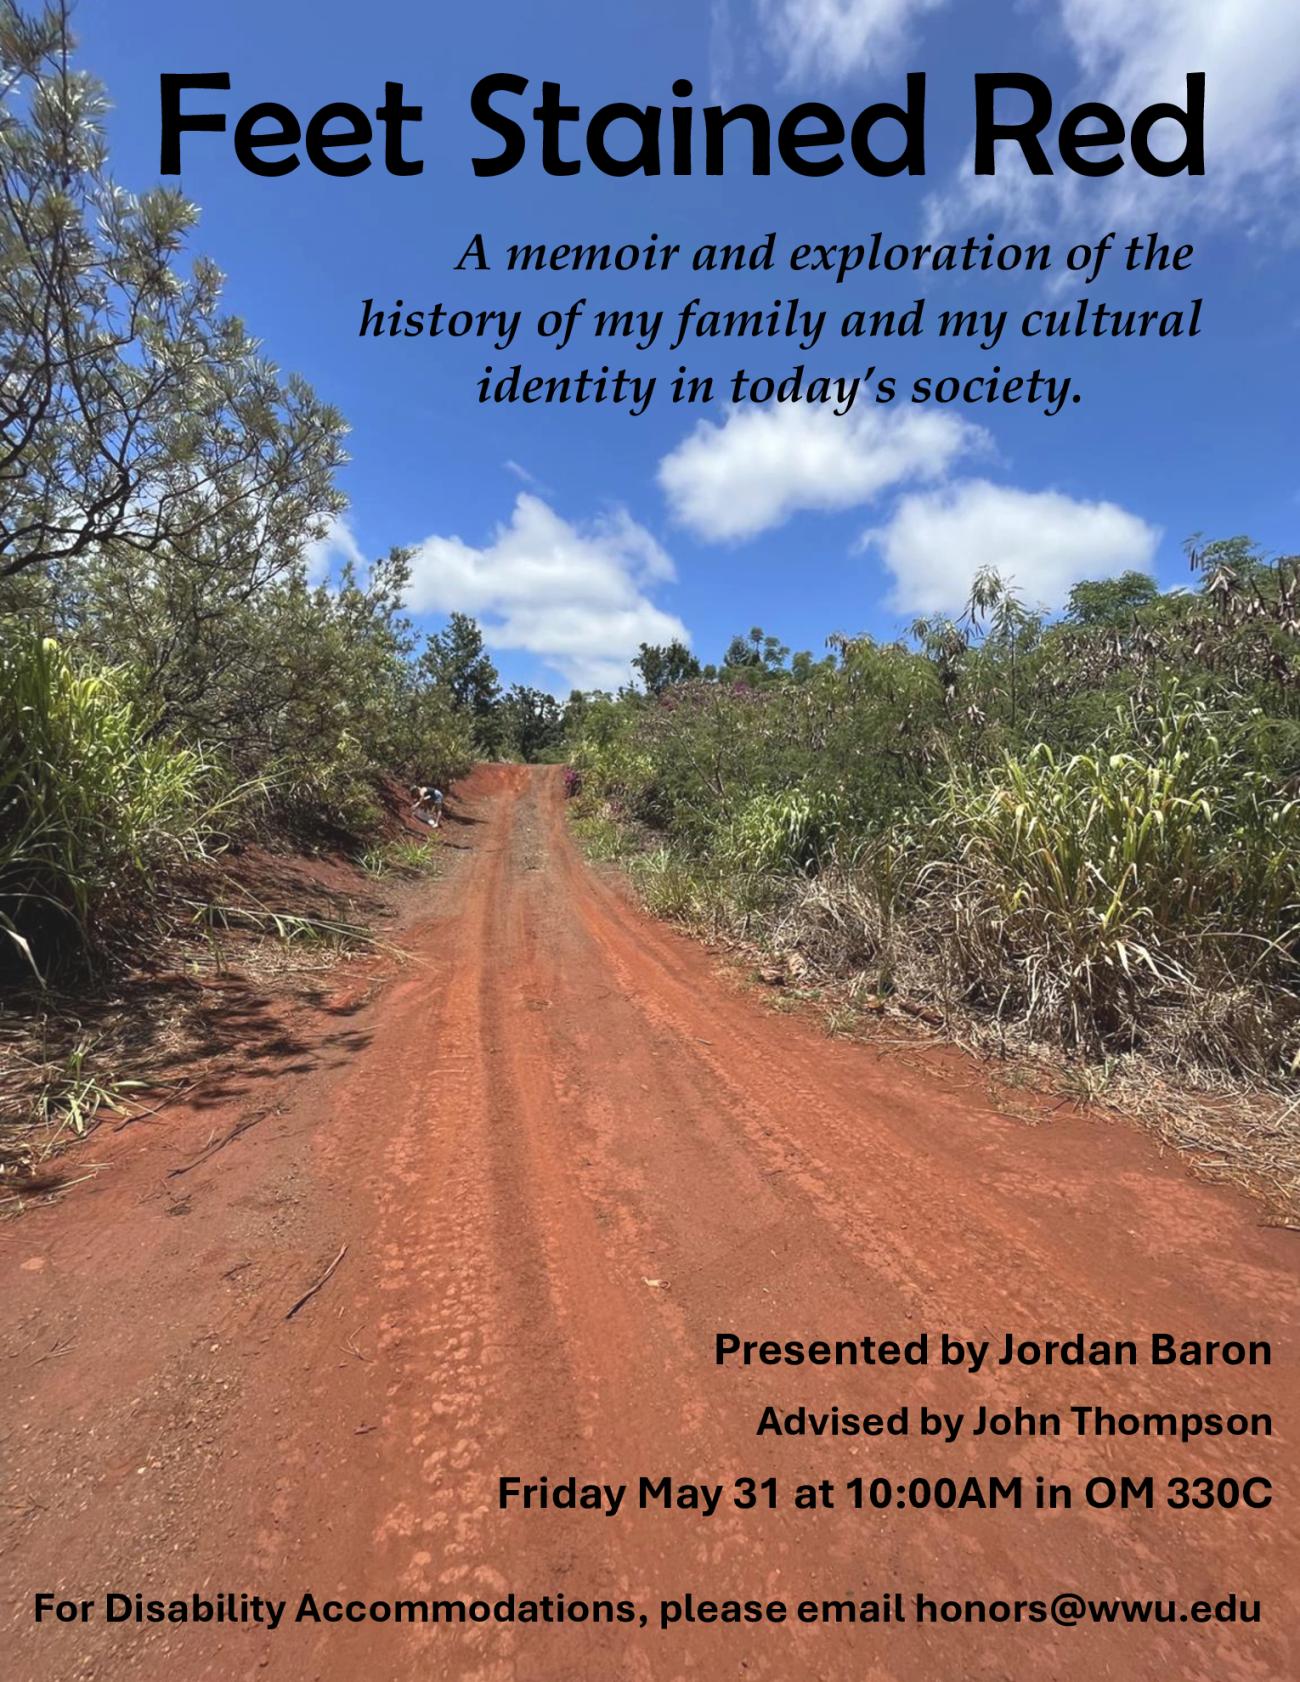 Background photo of a red dirt road with green plants growing on either side and a blue sky. Titled: Feet Stained Red. A memoir and exploration of the history of my family and my cultural identity in today’s society. Presented by Jordan Baron. Advised by John Thompson. Friday May 31 at 10:00AM in OM 330C. For Disability Accommodations, please email honors@wwu.edu"